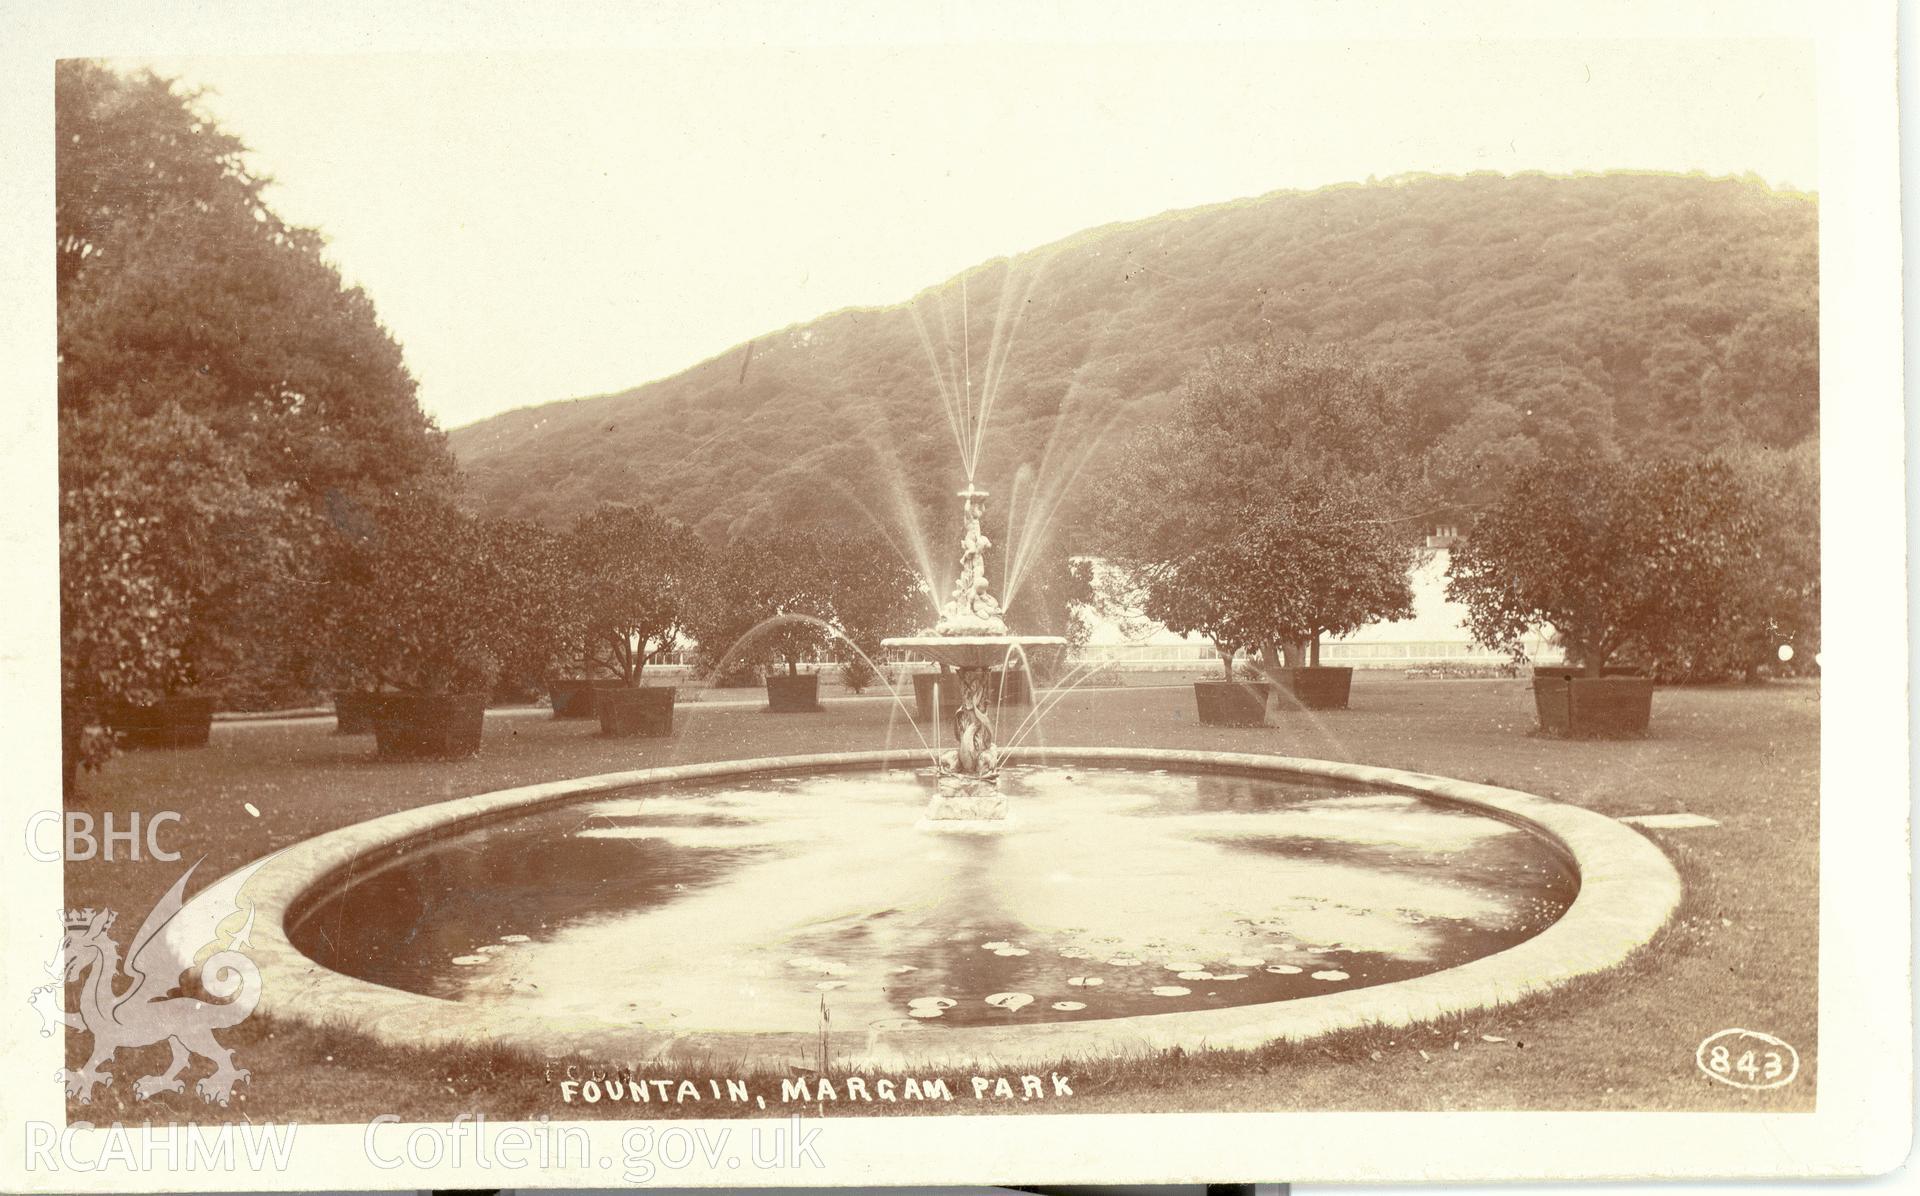 Digitised postcard image of fountain, Margam park gardens,  E. Miles, Ewenny Road Studio, Bridgend. Produced by Parks and Gardens Data Services, from an original item in the Peter Davis Collection at Parks and Gardens UK. We hold only web-resolution images of this collection, suitable for viewing on screen and for research purposes only. We do not hold the original images, or publication quality scans.